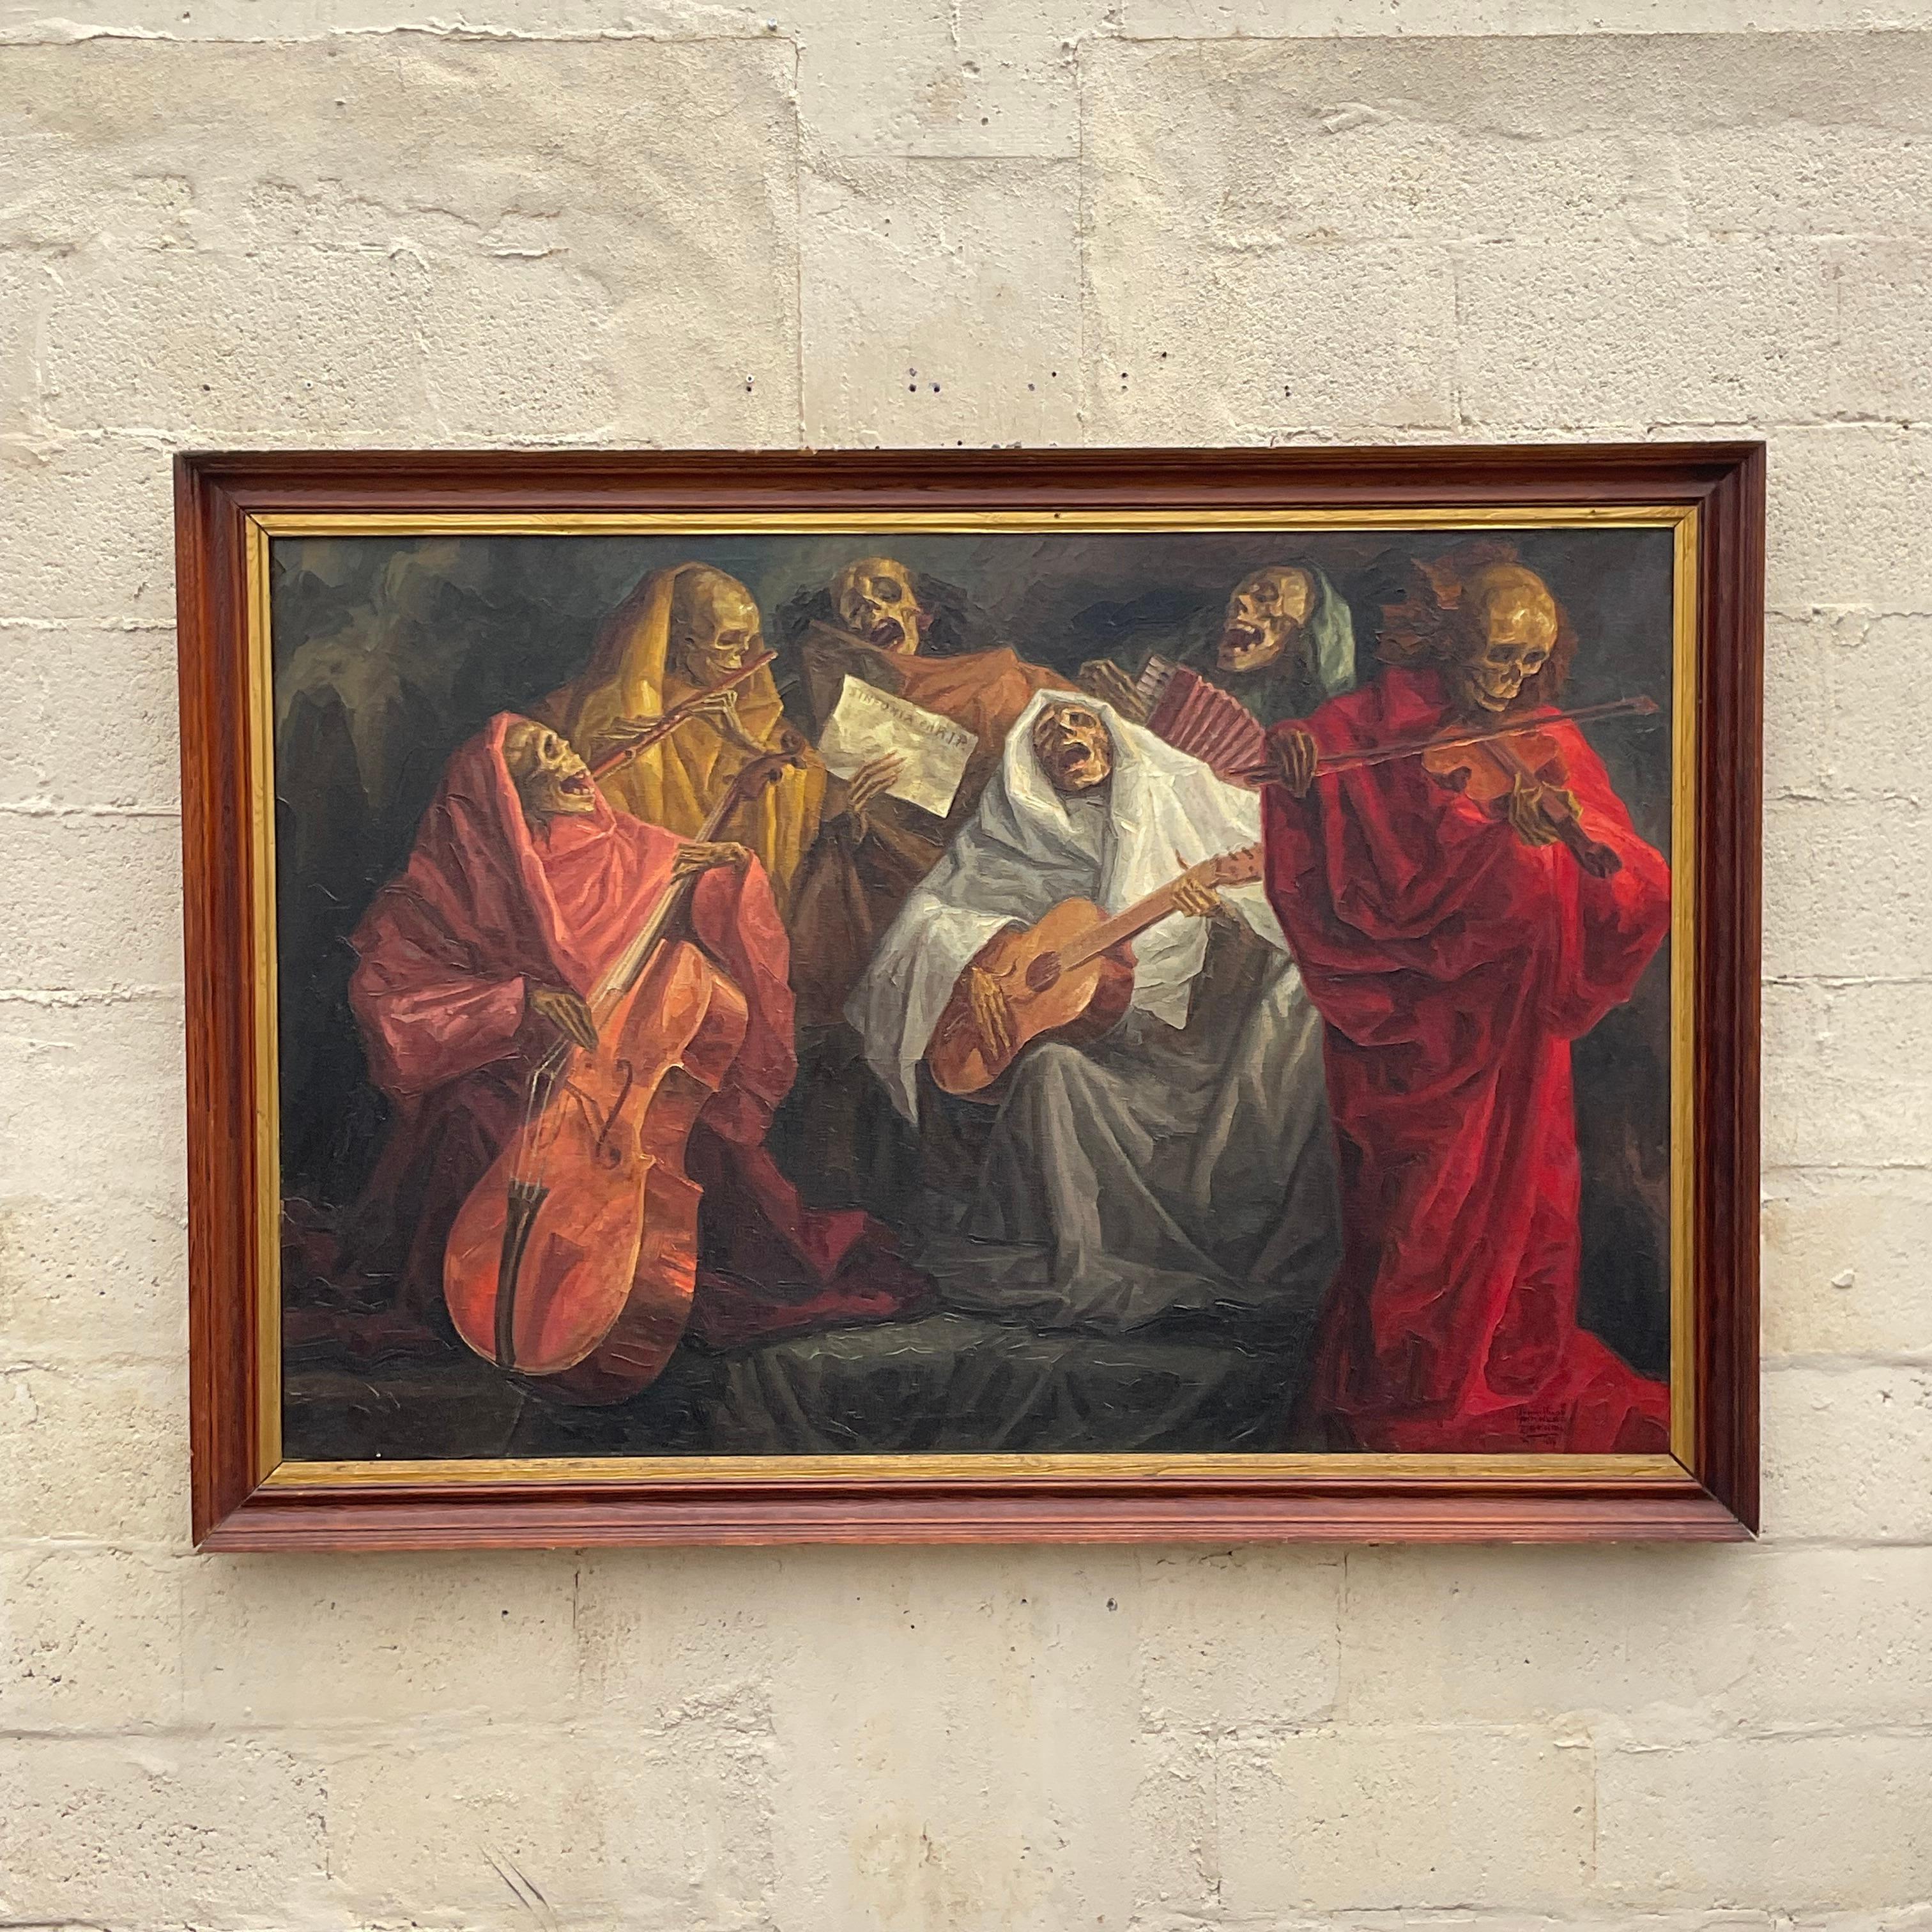 A fantastic monumental original signed oil painting. An impressive work by the Spanish artist Juan Jose Morera Guajardo. A fantastic composition in deep rich colors. Beautifully framed and signed by the artist. Acquired from a Palm Beach estate